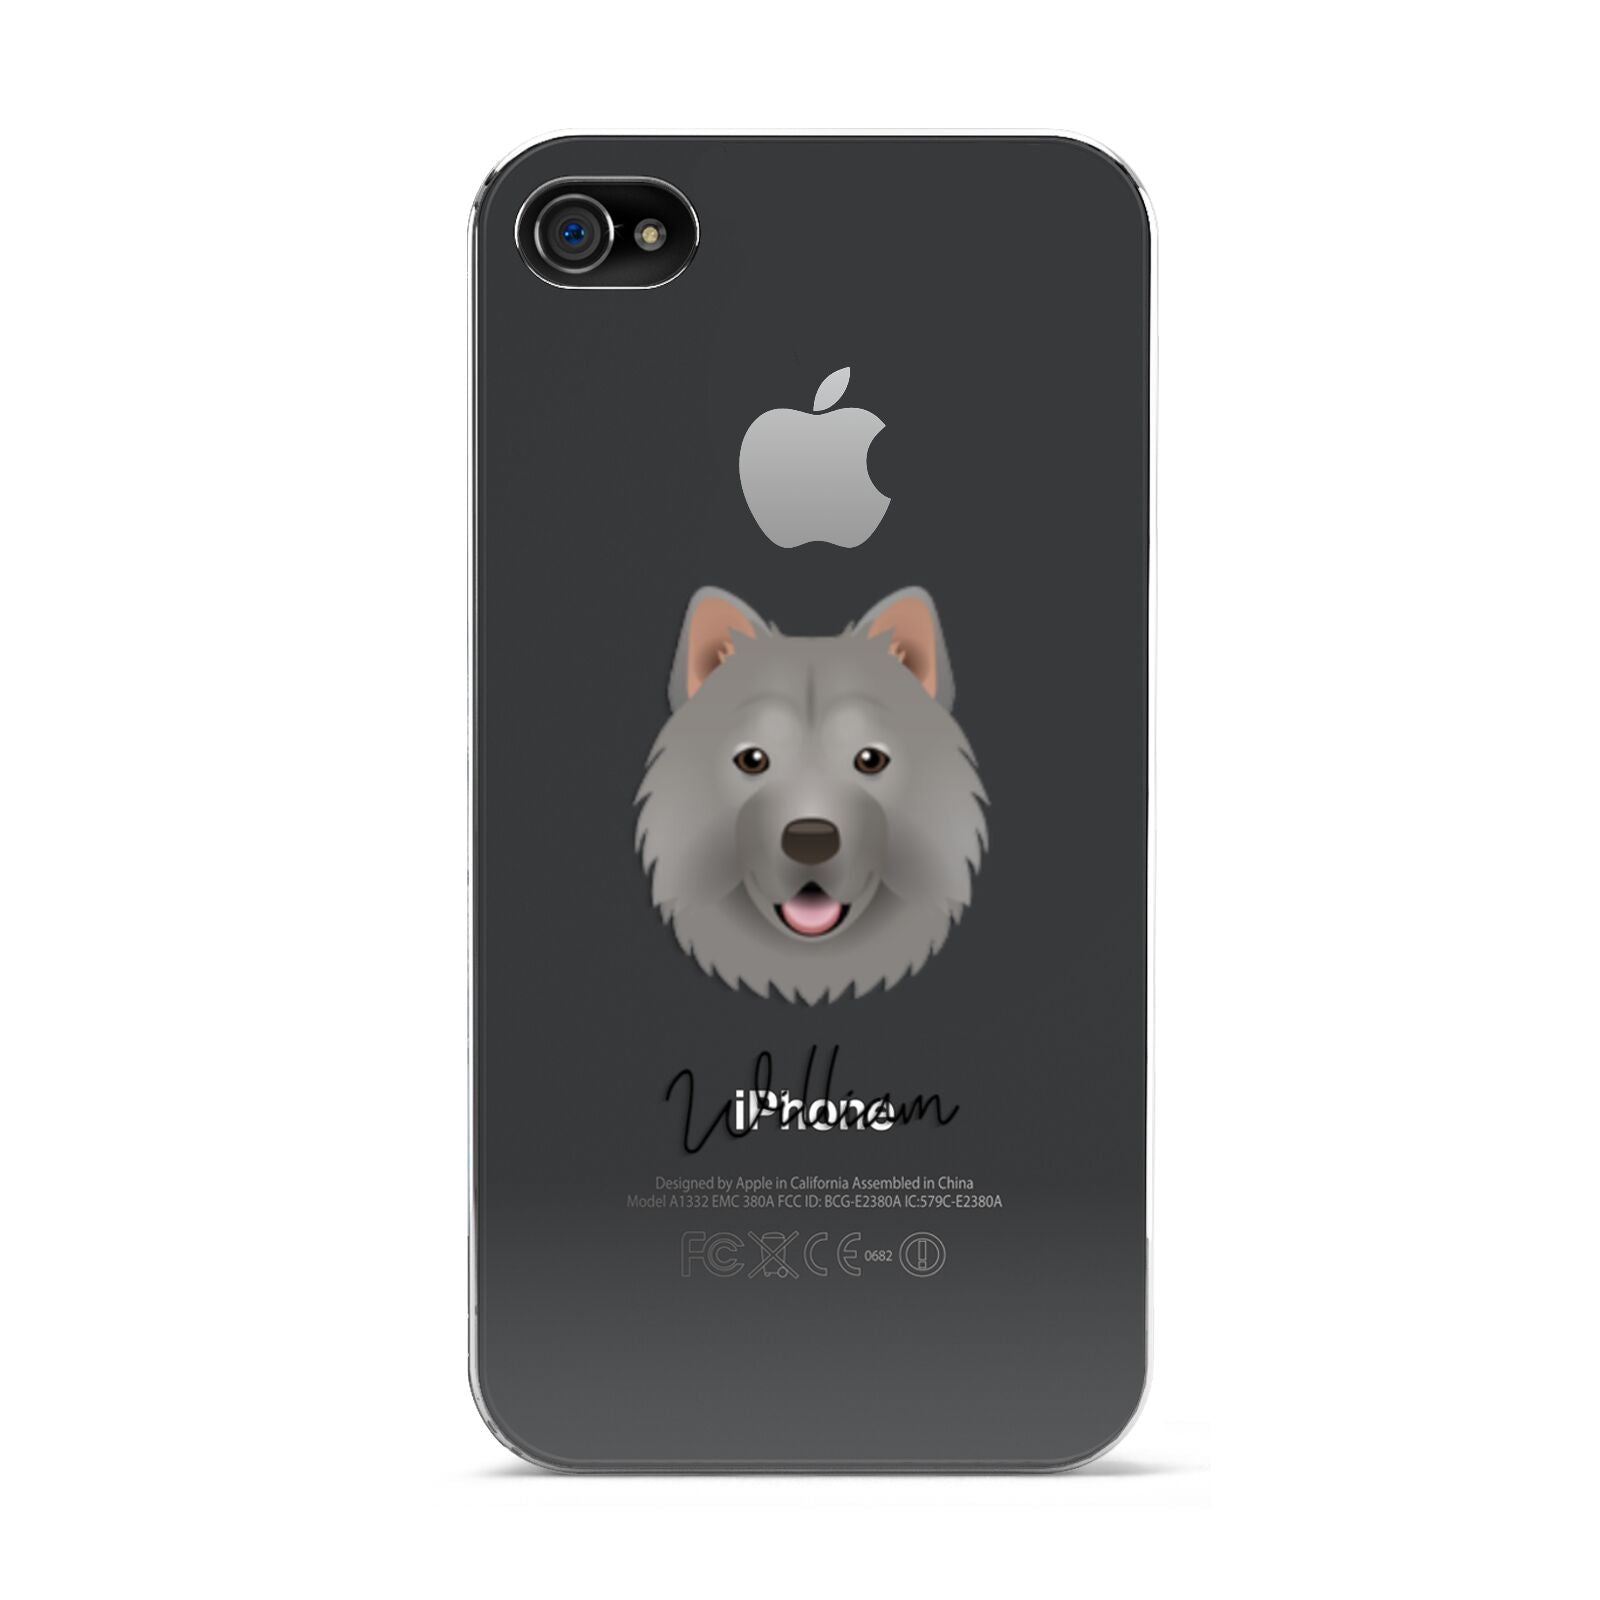 Chusky Personalised Apple iPhone 4s Case